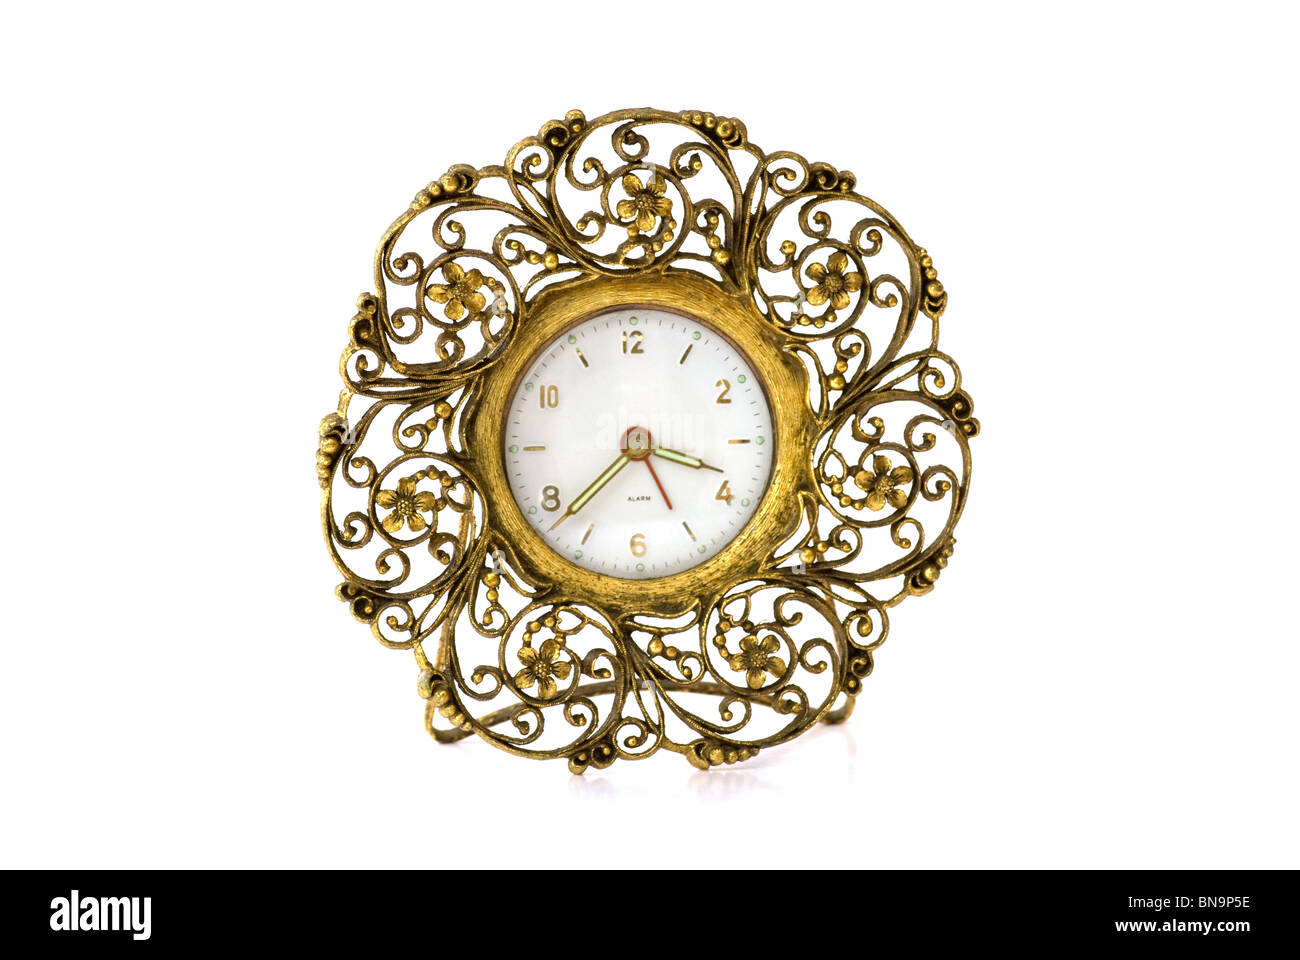 Ornate vintage fifties gold metal alarm clock with stand - isolated. The fancy clock is surrounded by metal twisted into curls like lace. Stock Photo